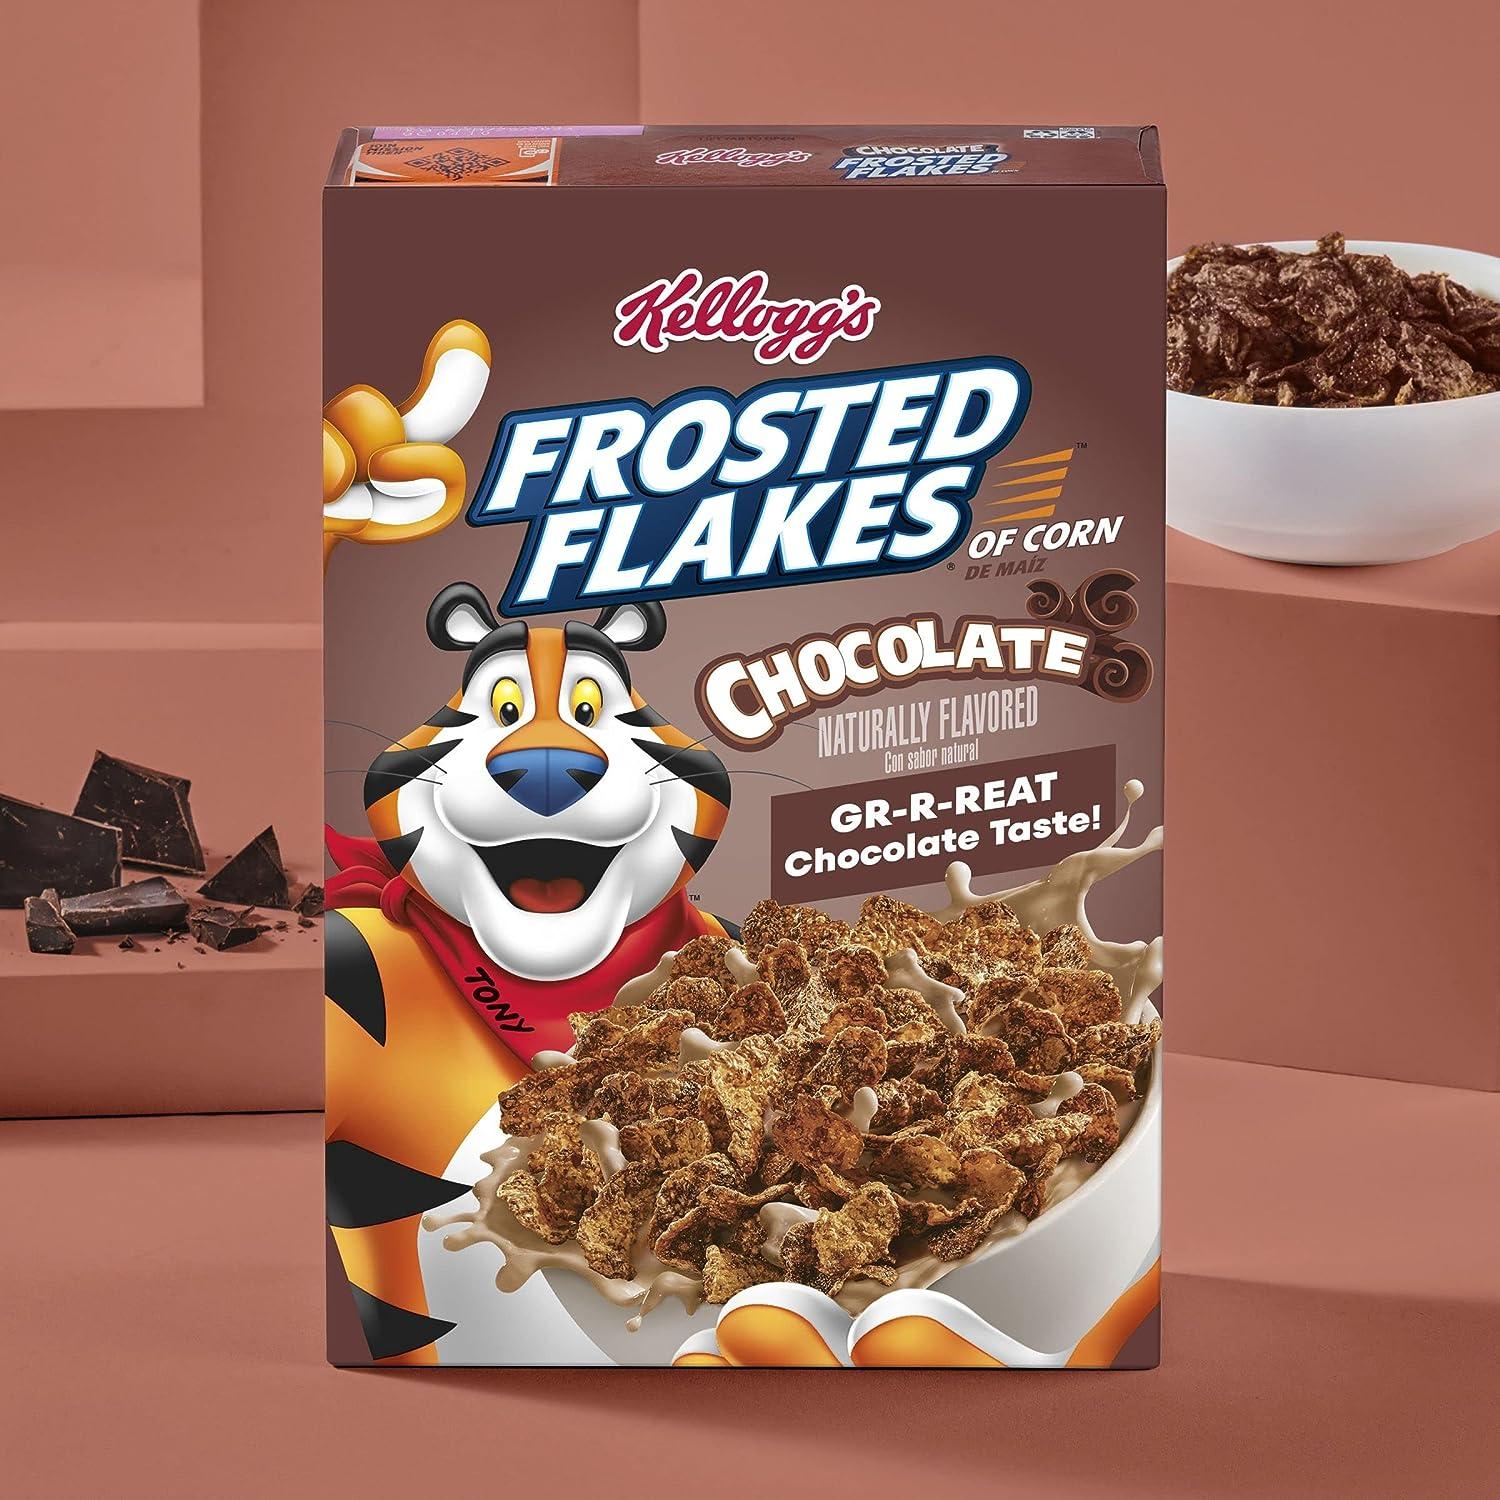 Kellogg's Frosted Flakes Cold Breakfast Cereal, 8 Vitamins And Minerals,  Kids Snacks, Chocolate, 13.7oz Box (1 Box)